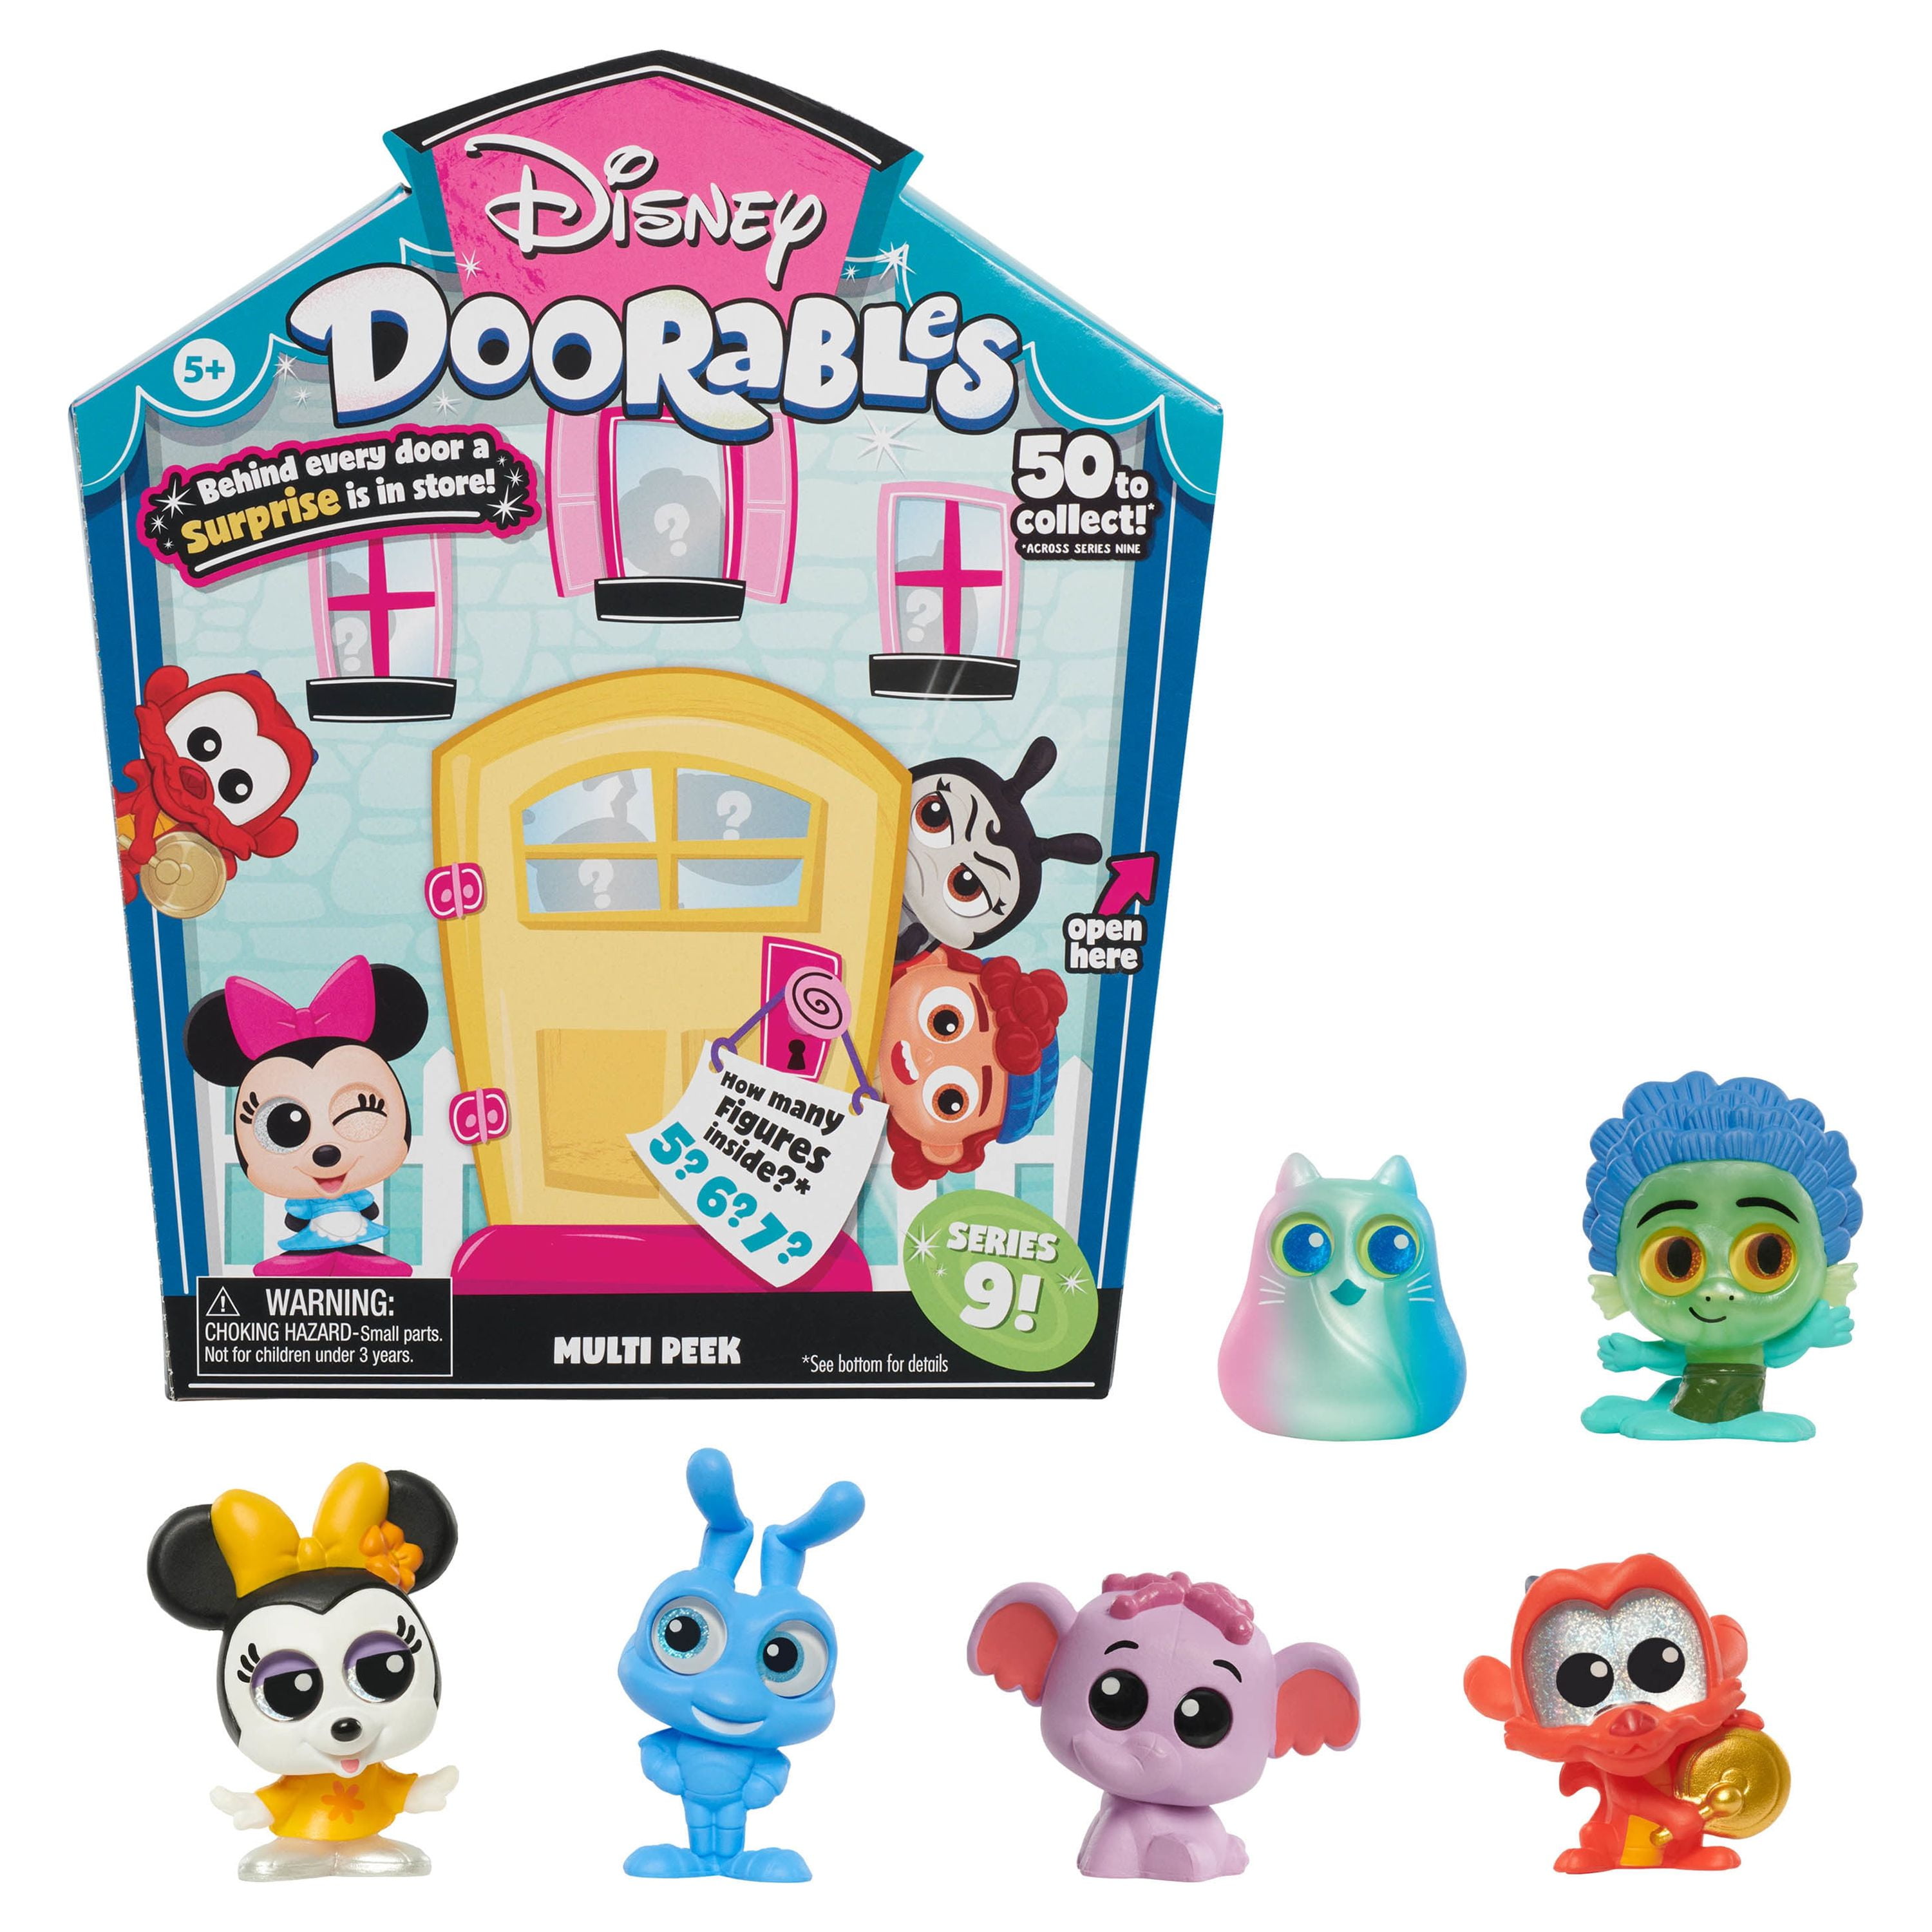 Disney Doorables Multi Peek Series 9, Collectible Blind Bag Figures, Officially Licensed Kids Toys for Ages 5 Up, Gifts and Presents: $5